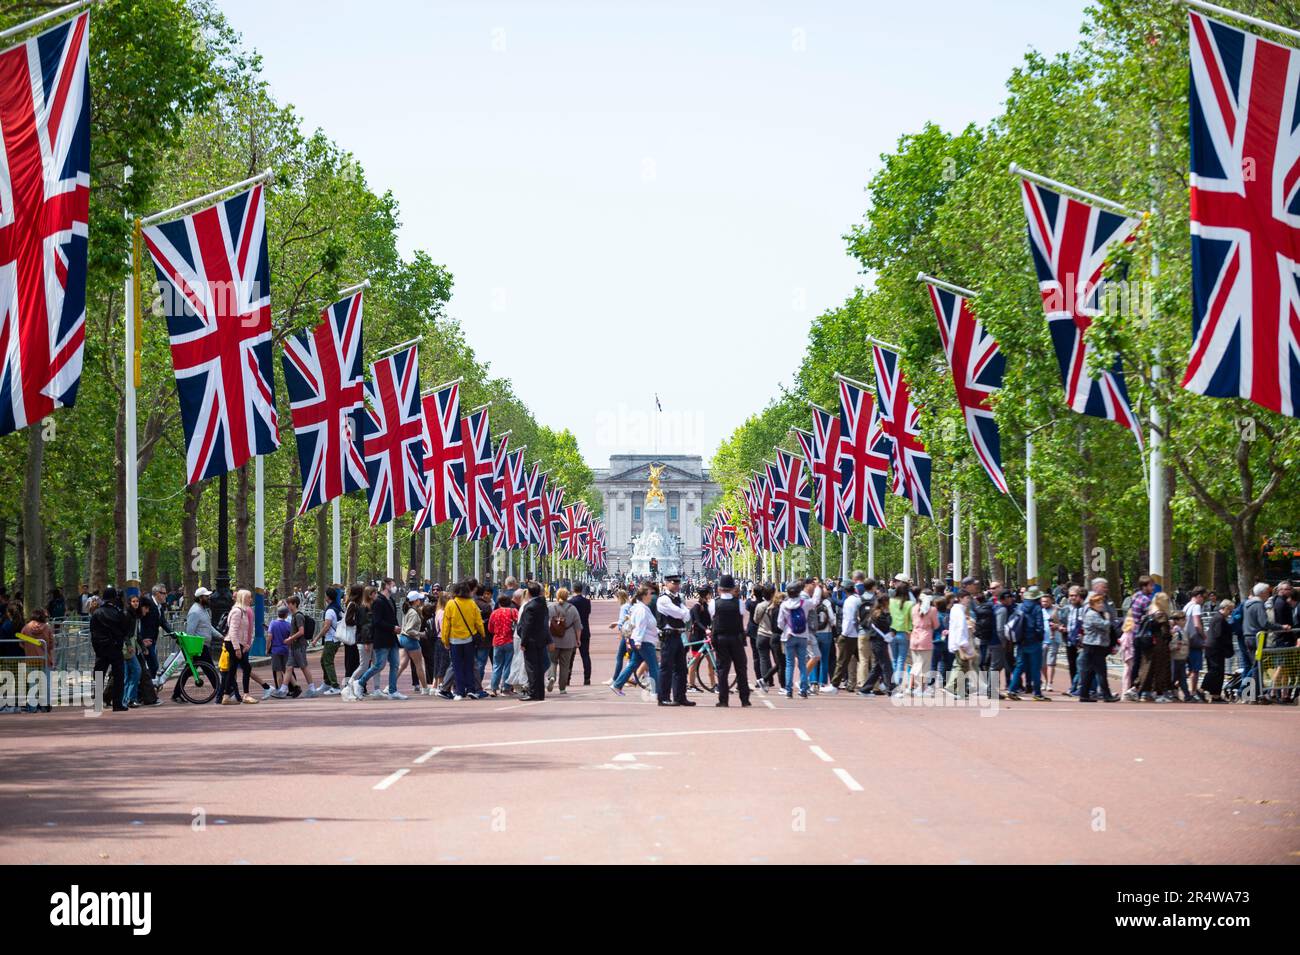 London, UK.  30 May 2023.  People crossing as Union flags line The Mall during a rehearsal for Trooping the Colour.  The Sovereign's birthday is officially celebrated by the ceremony of Trooping the Colour (King's Birthday Parade) and will be the first for King Charles.  A display of military pageantry will take place on 17 June with regiments of the Household Division marching down The Mall to Horse Guards Parade, where the King will attend and take the salute.  Credit: Stephen Chung / Alamy Live News Stock Photo